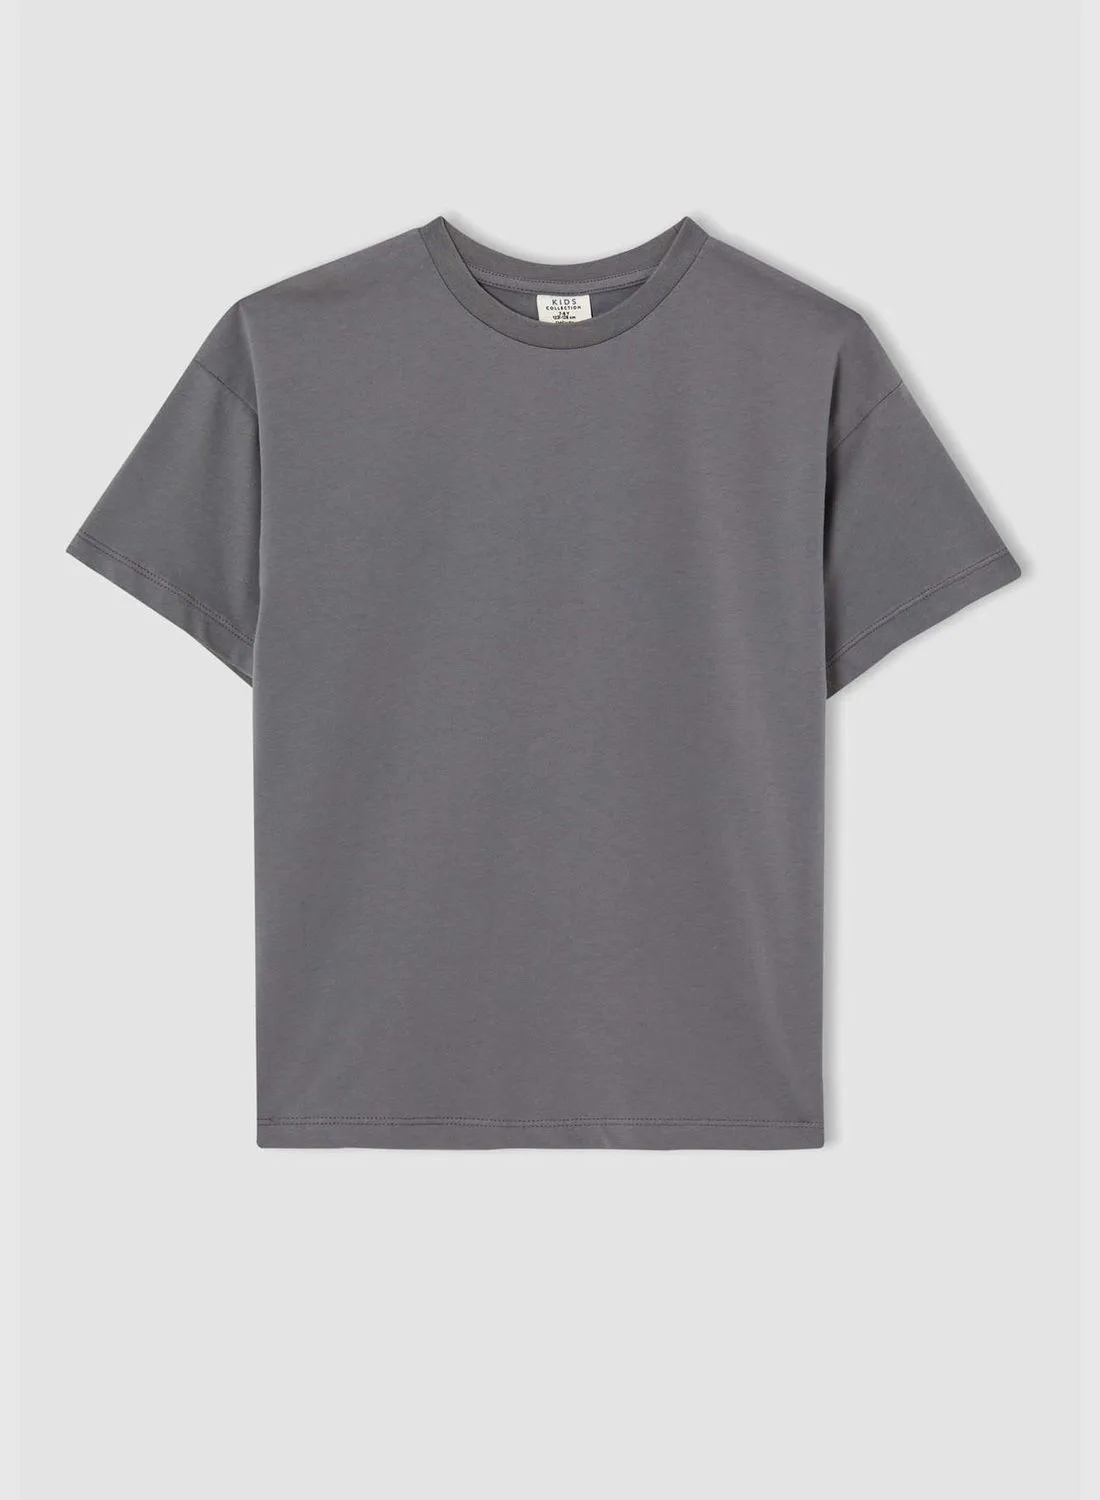 DeFacto Relaxed Fit Basic Short Sleeve Crew Neck T-Shirt